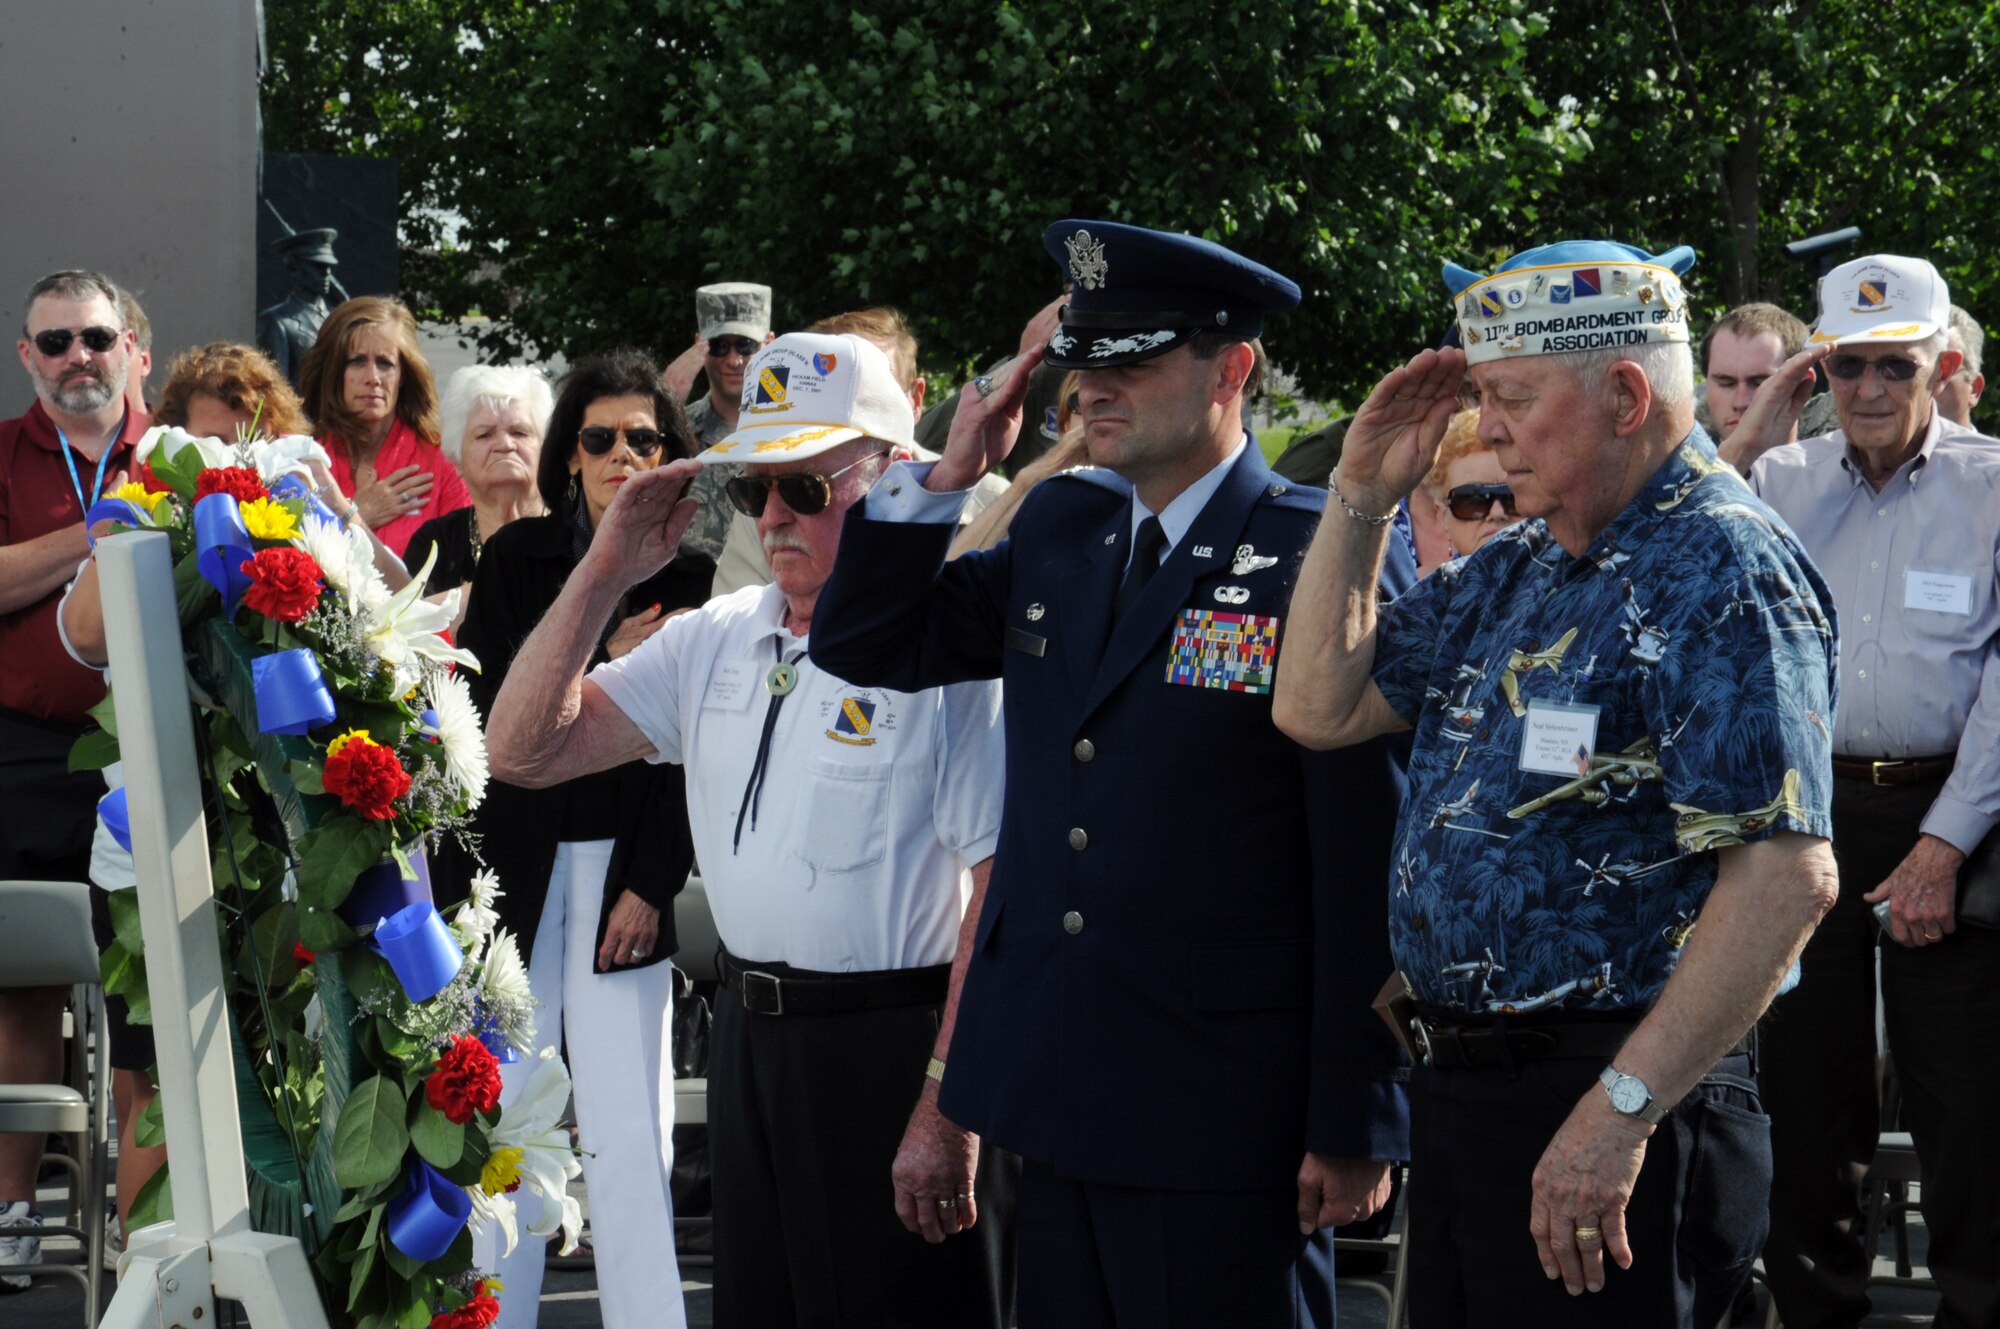 Col. Ken Rizer, 11th Wing/Joint Base Andrews Commander along with Bud Jung (left) and Neil Siebenbruner (Right) take part in a wreath laying ceremony at the Air Force Memorial, May 17. The ceremony was held to pay tribute the members of the 11th Bombardment Group that lost their lives in the Pacific during World War II. (U.S. Air Force photo/Airman 1st Class Aaron Stout)